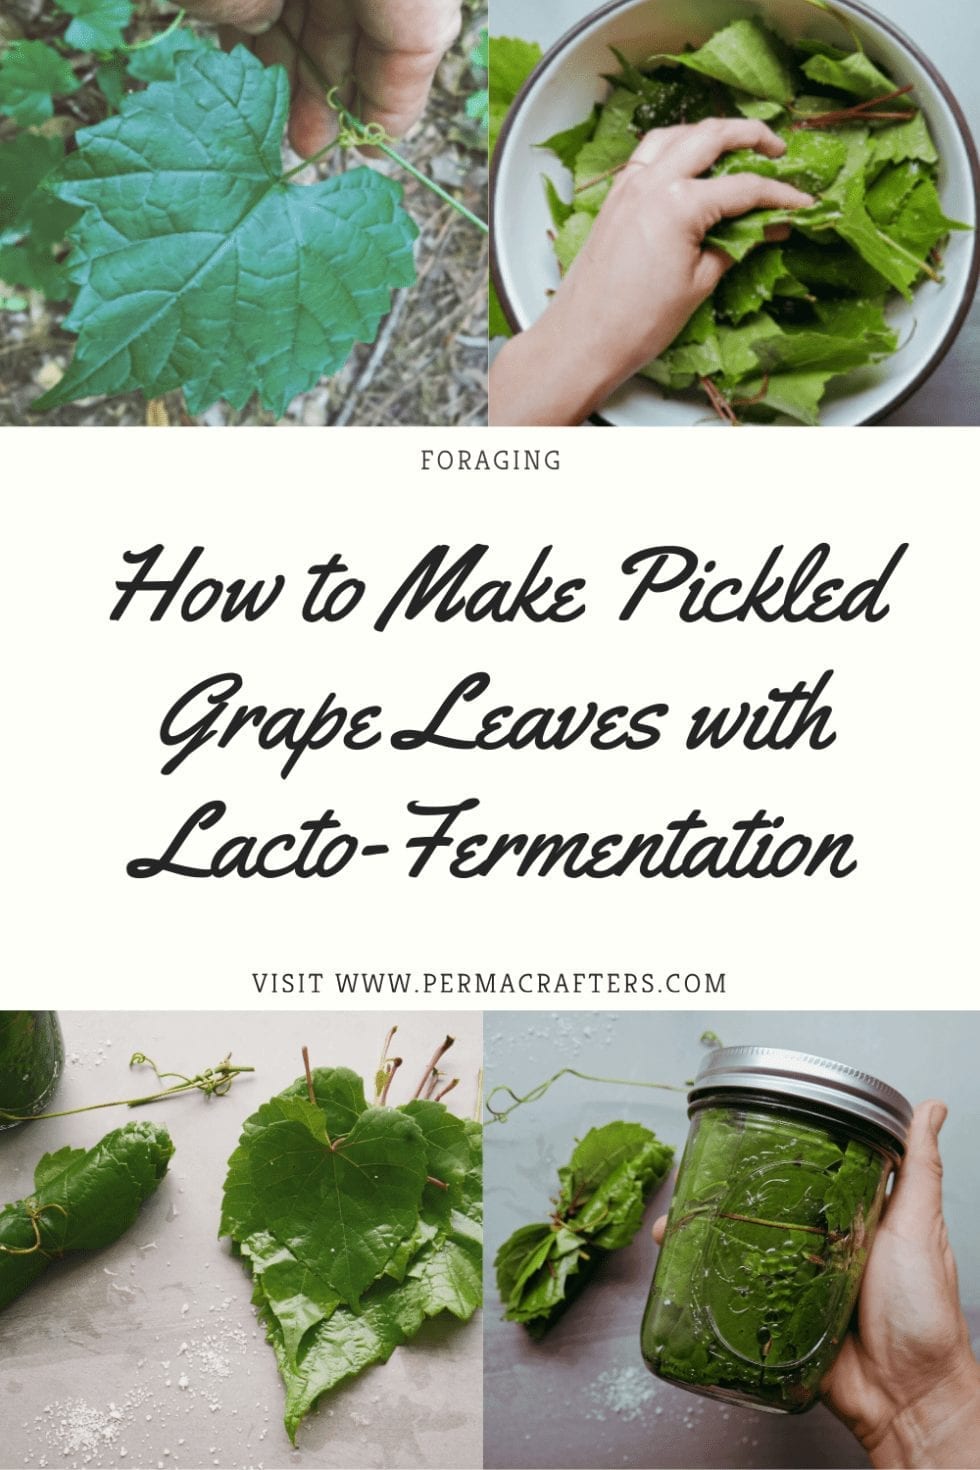 How to Make Pickled Grape Leaves with Lacto-Fermentation - Permacrafters